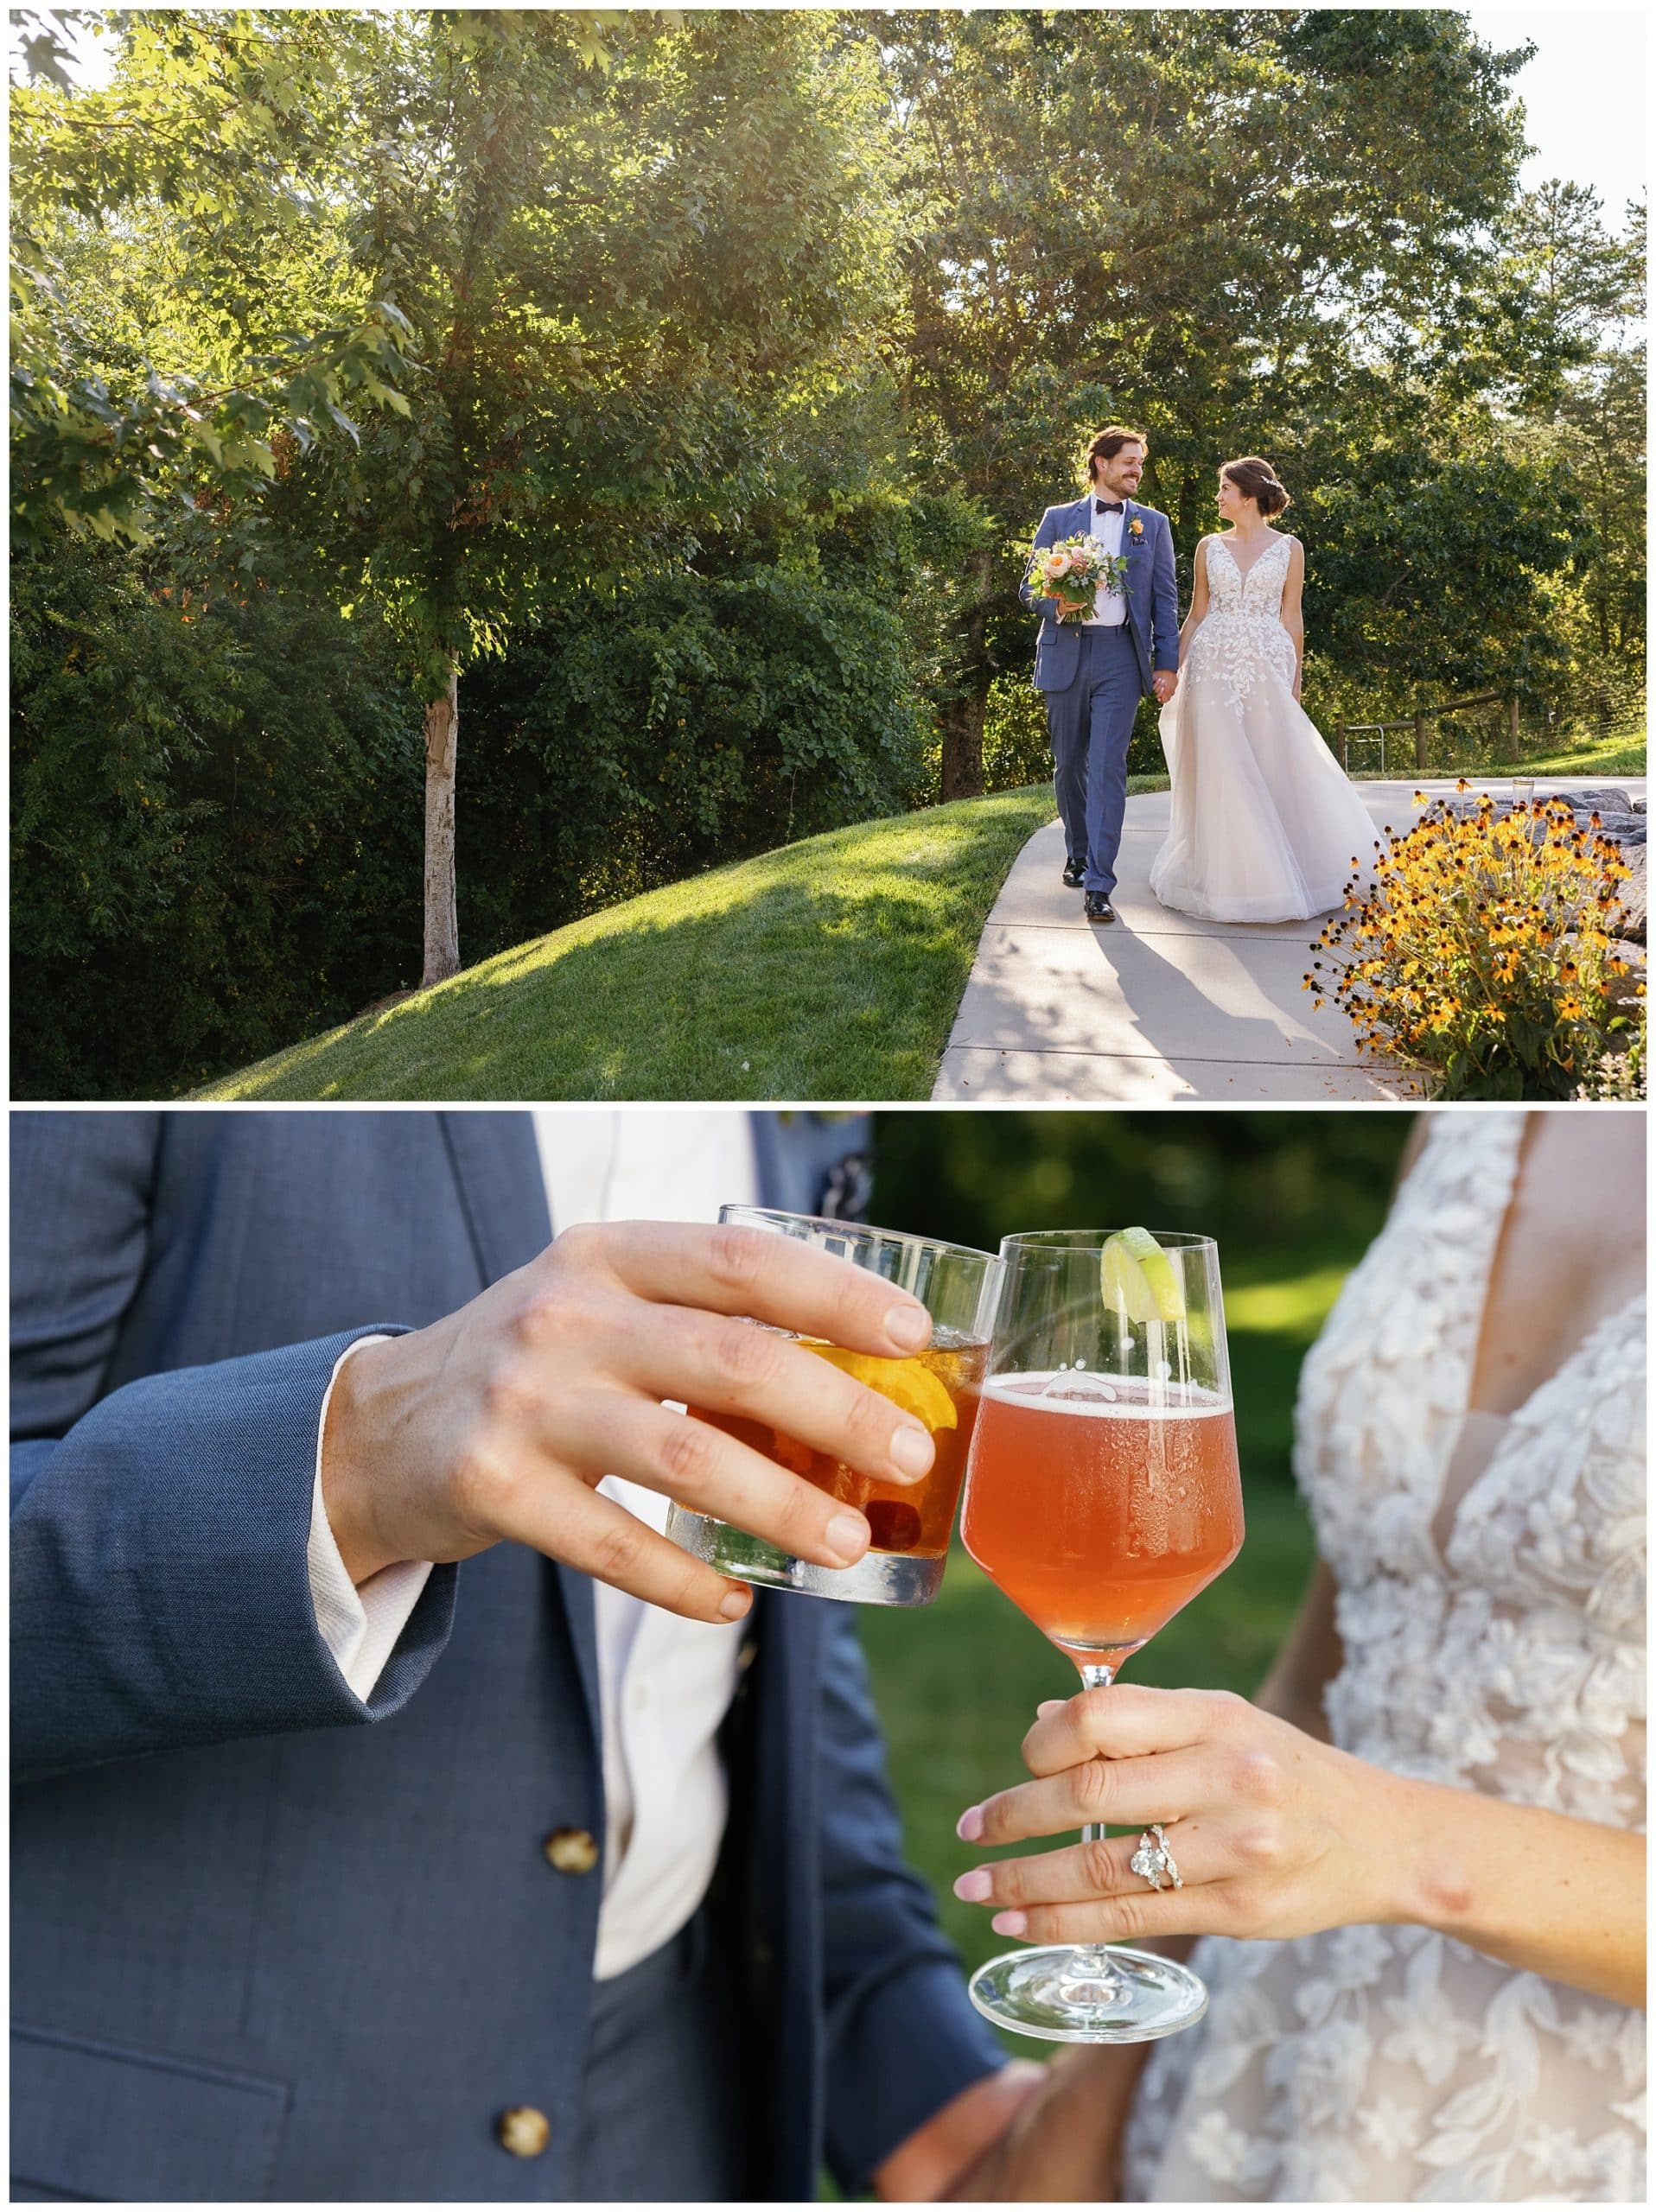 Two pictures of a bride and groom holding glasses of wine.